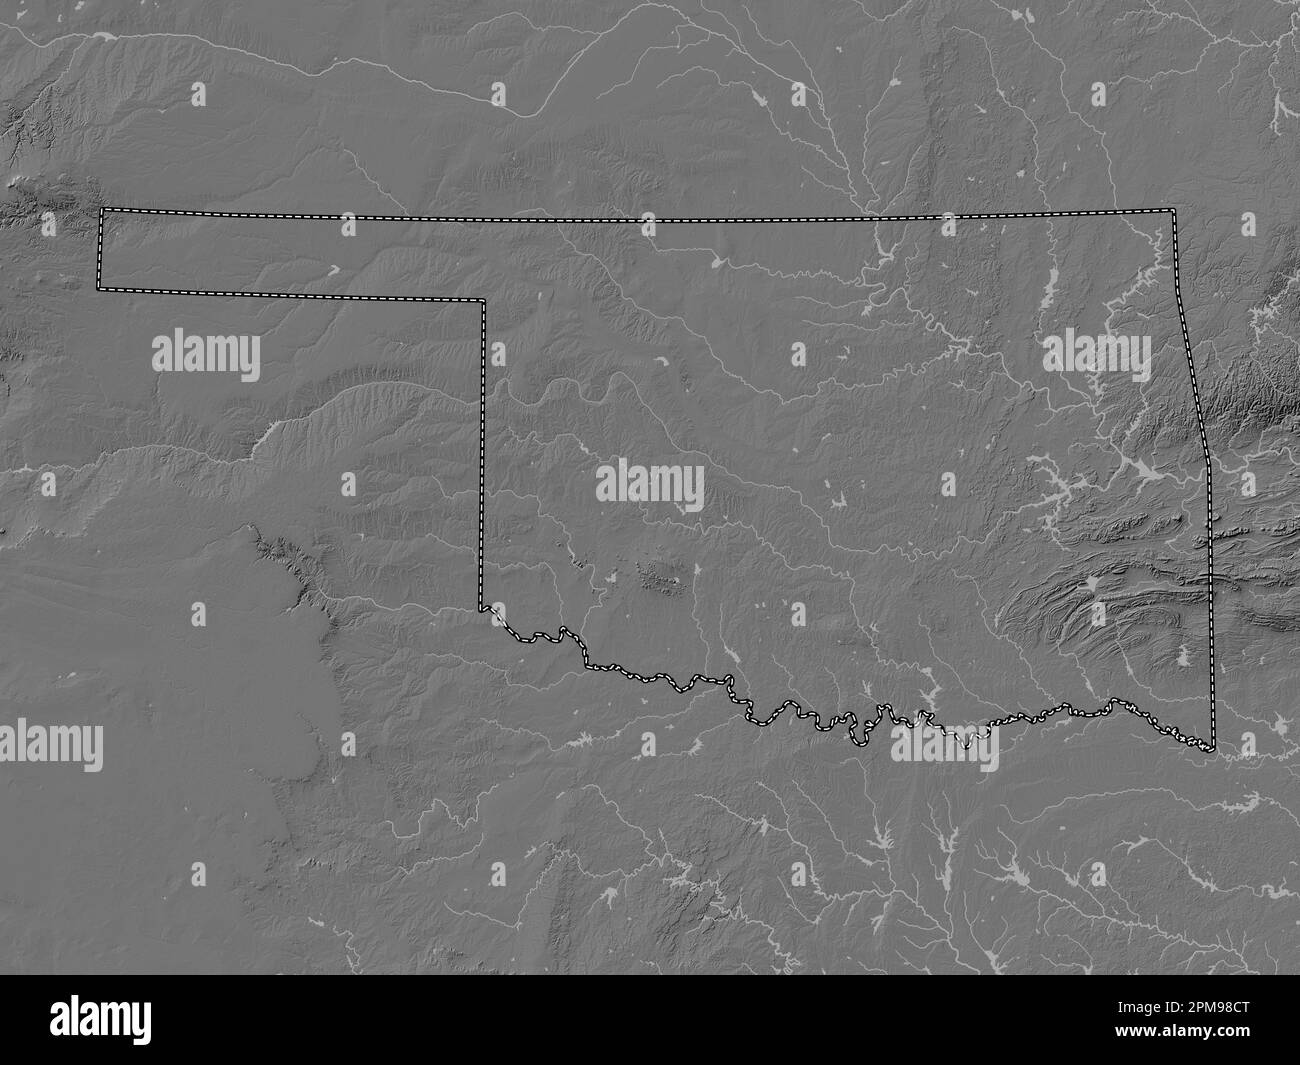 Oklahoma, state of United States of America. Bilevel elevation map with lakes and rivers Stock Photo